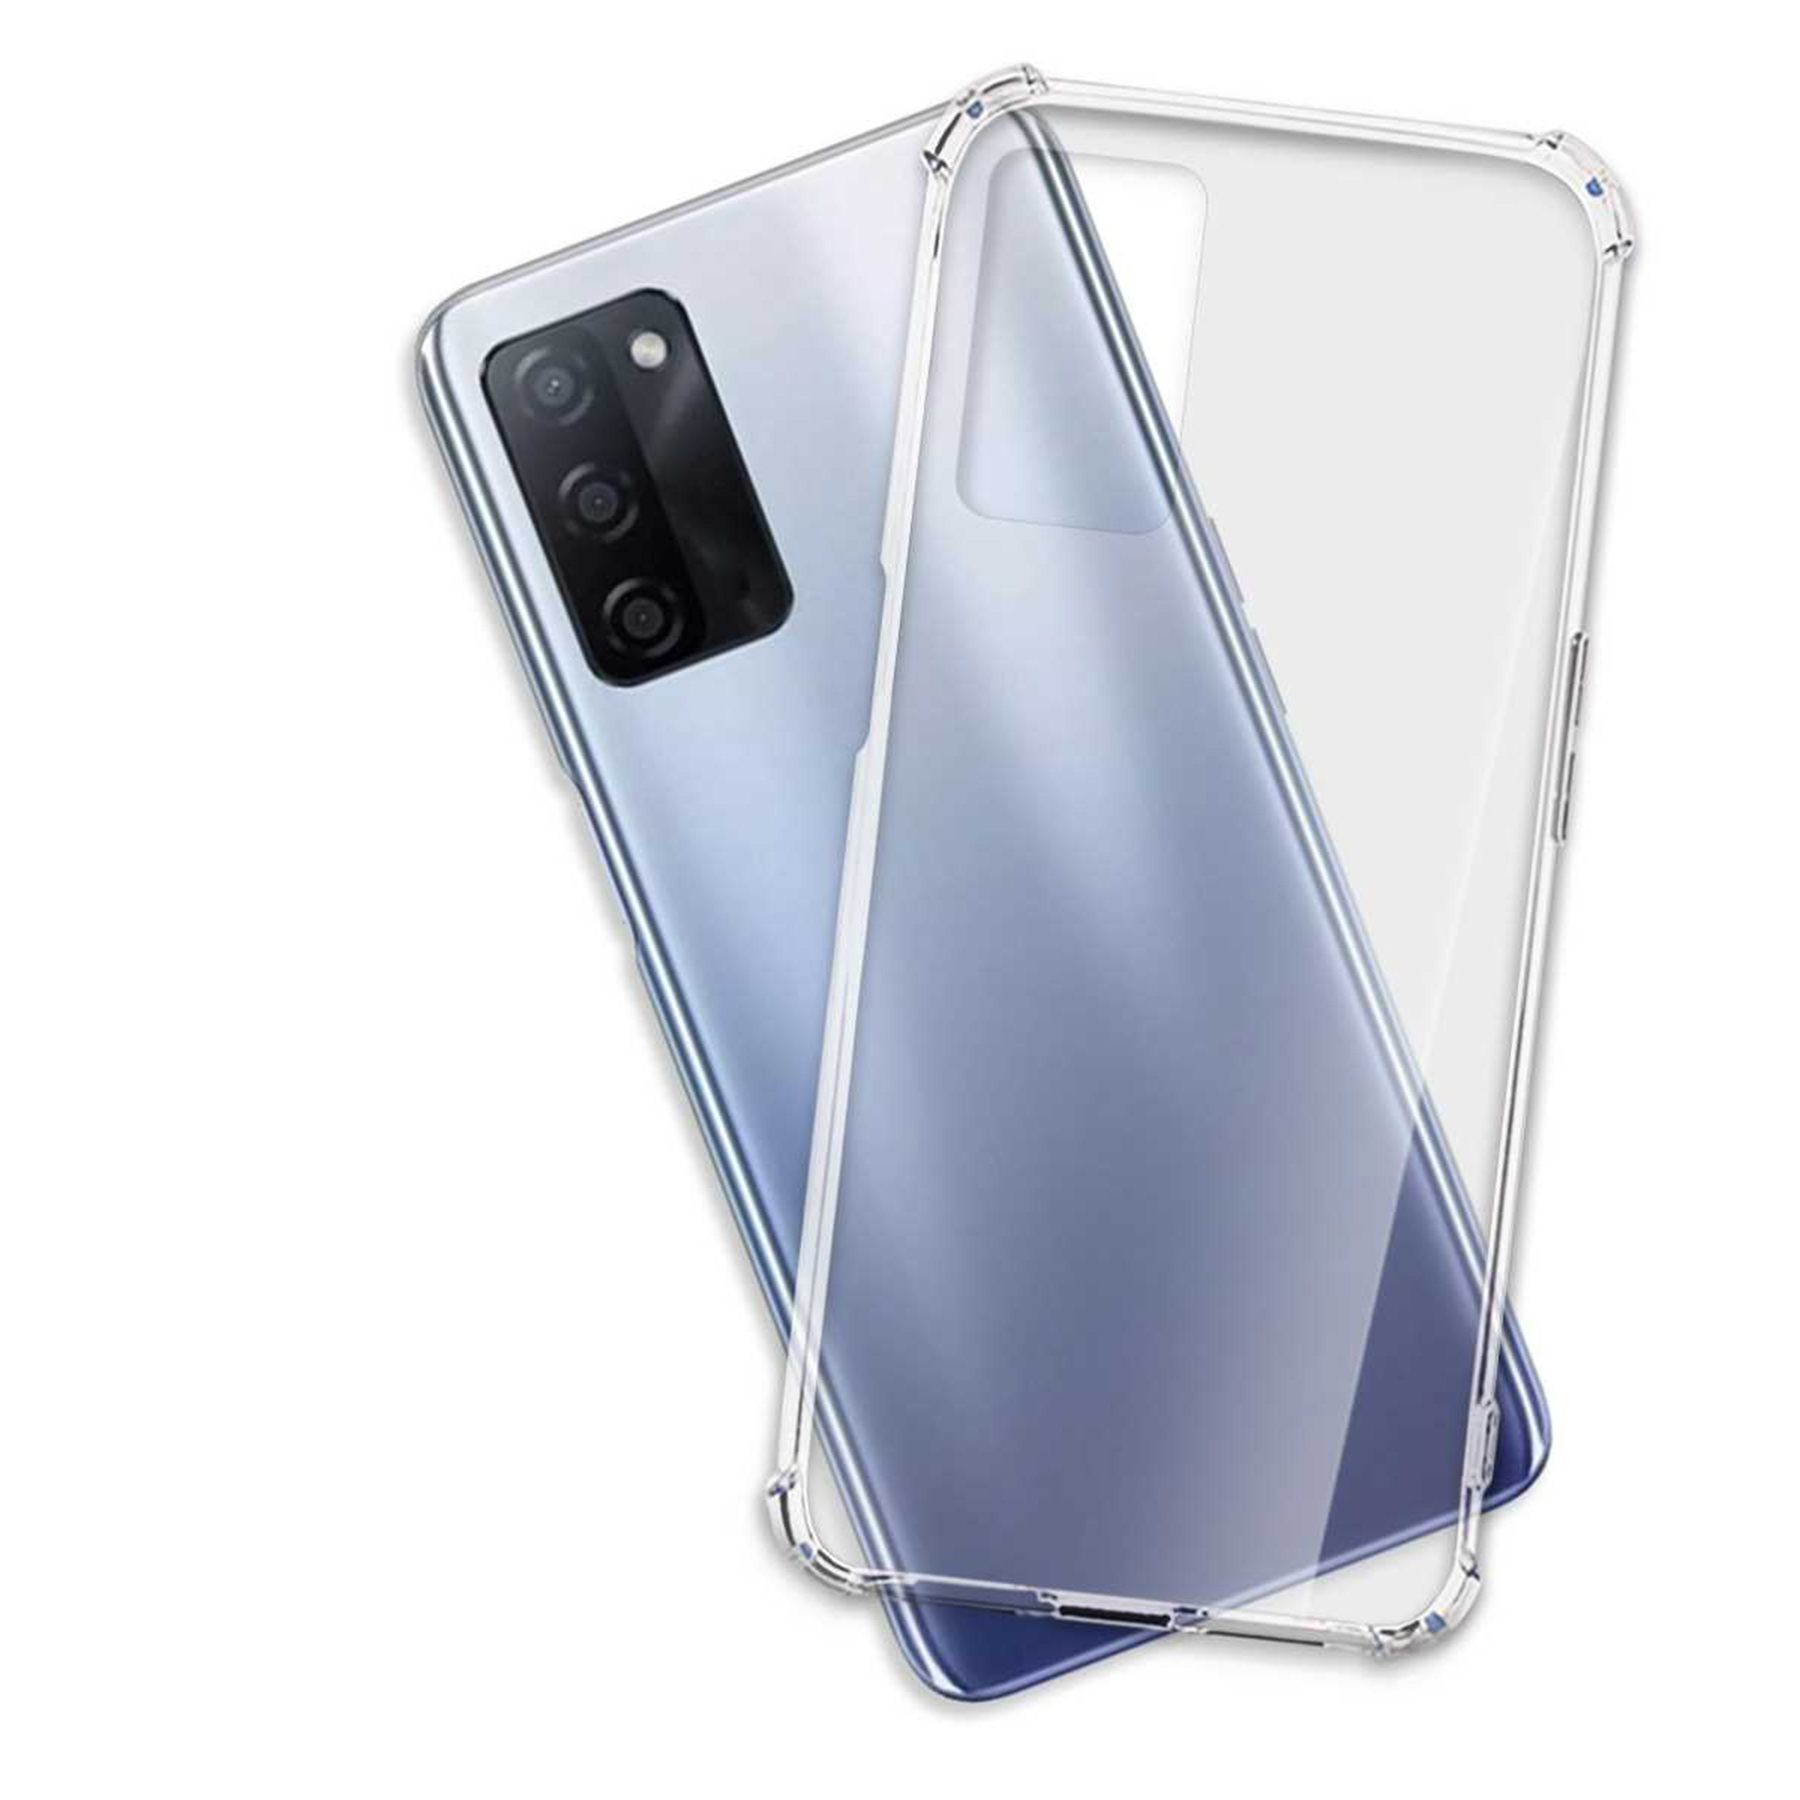 MTB MORE Armor Oppo, 5G, Transparent Clear Backcover, Case, A55 ENERGY